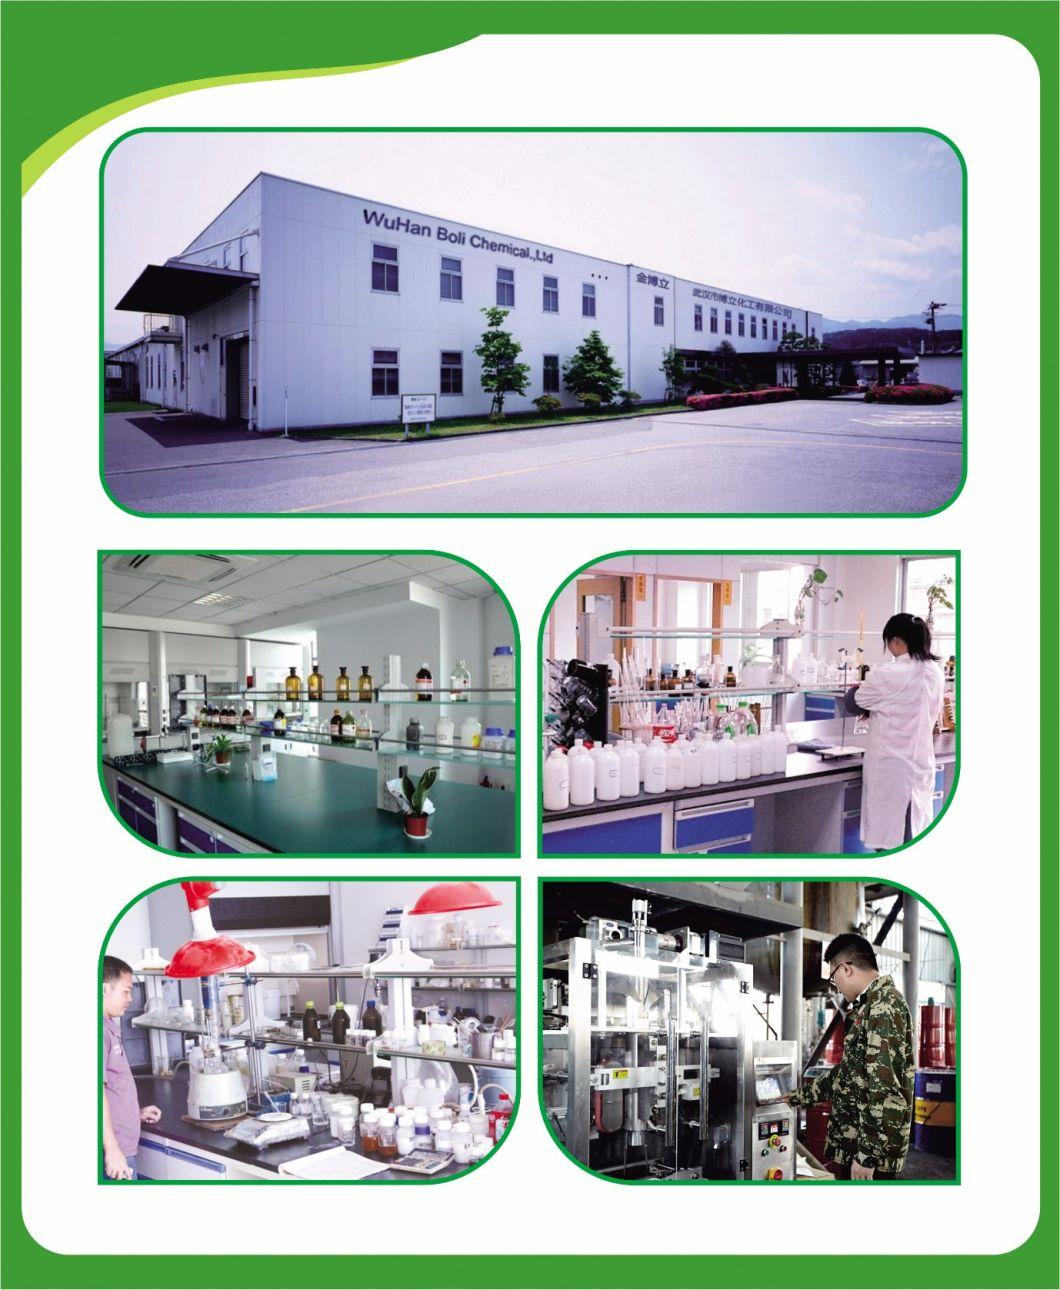 Constructional and Car Manufacturing Footwear Making Furniture Industry Favorite Good Low Cost Big Factory Nominated Glue